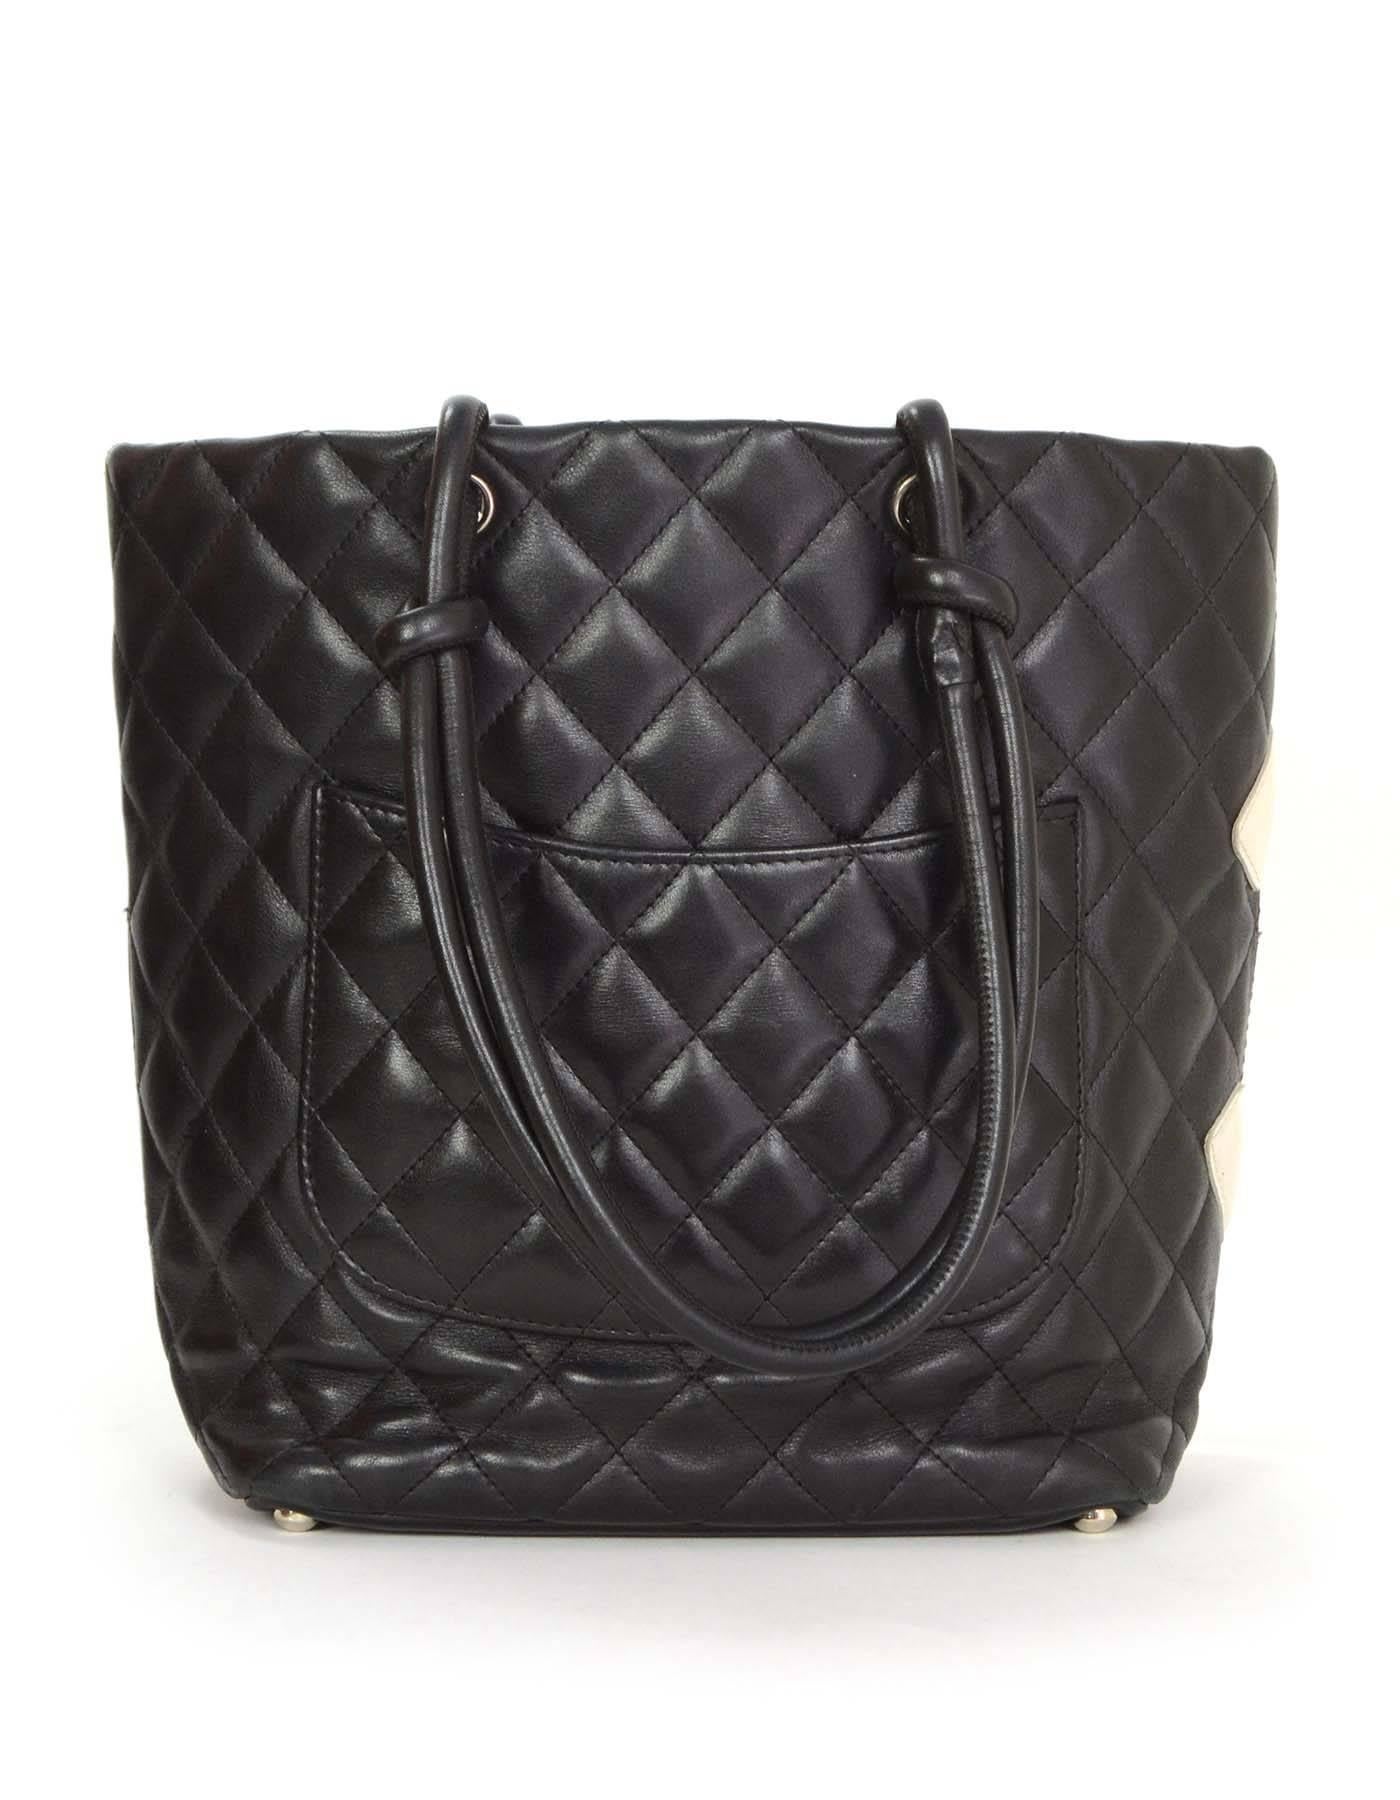 Chanel Black and White Leather Cambon Tote Bag SHW For Sale at 1stDibs